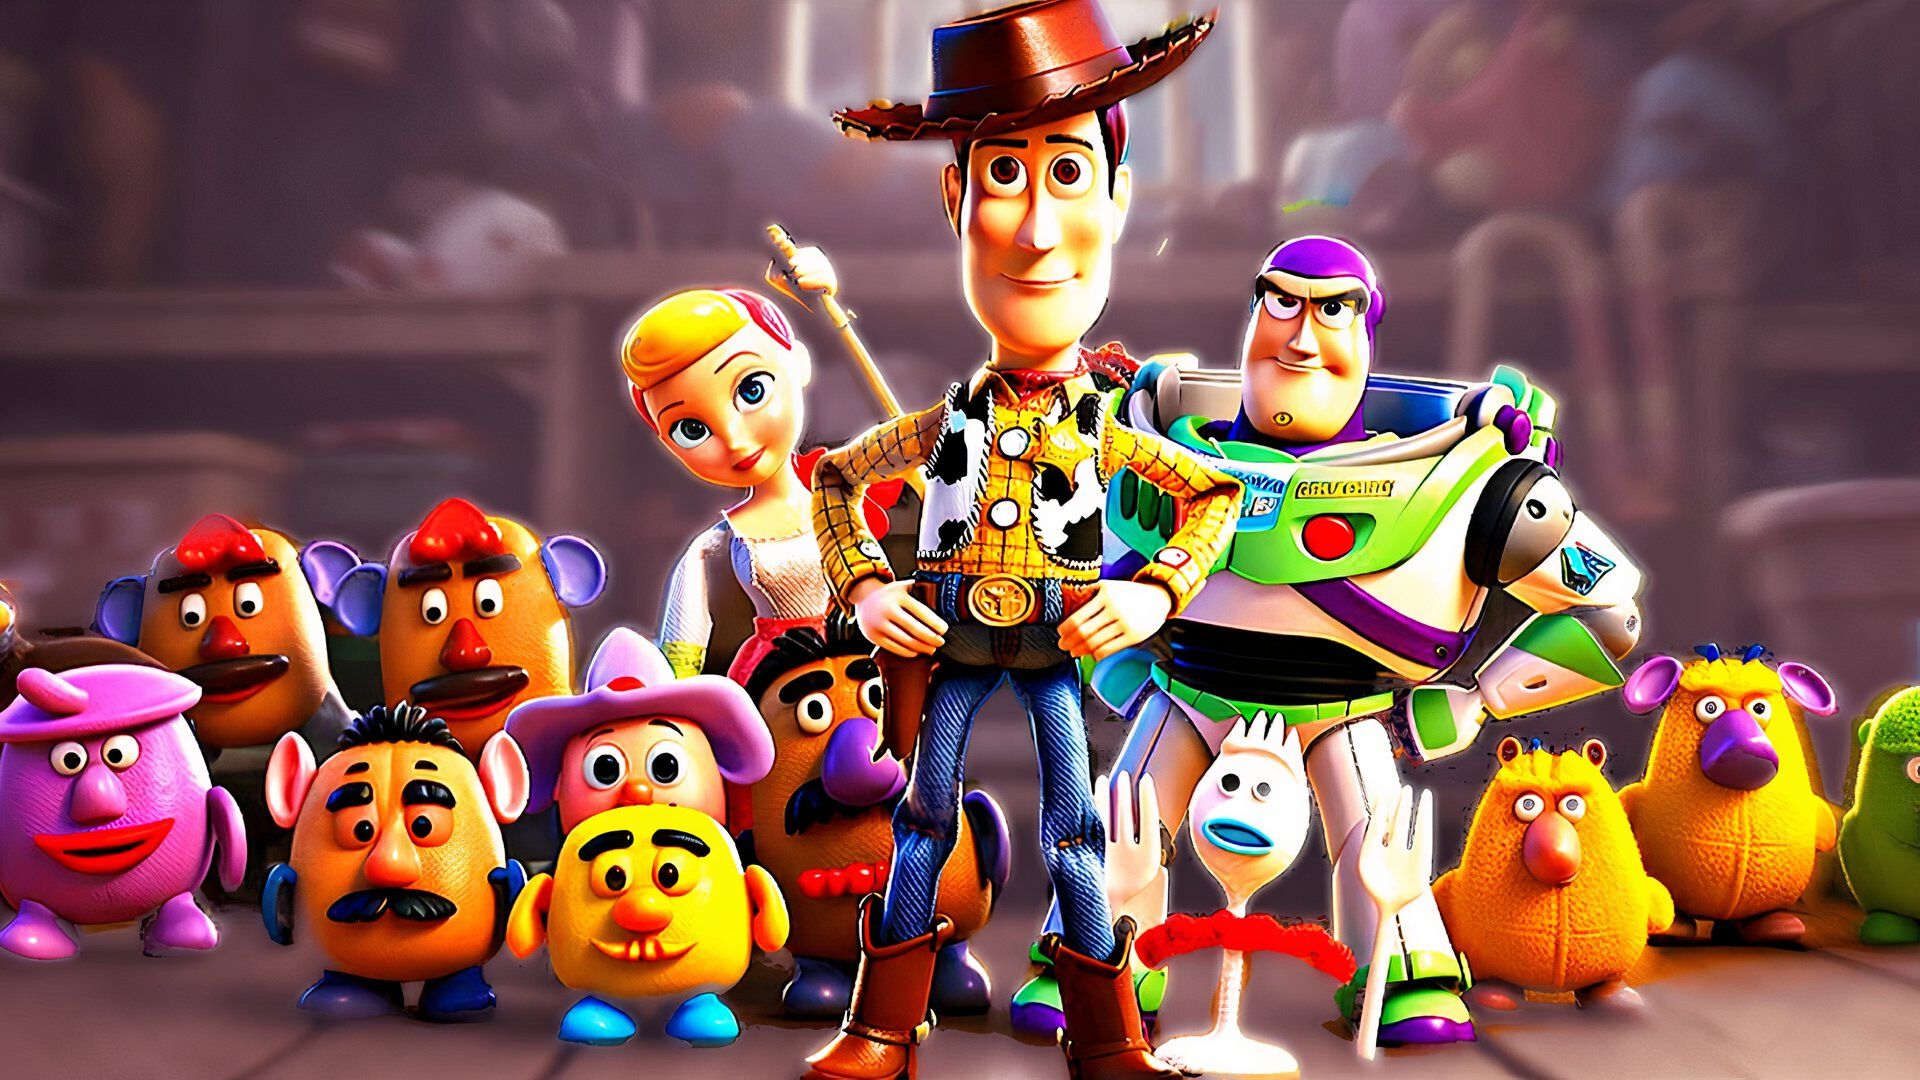 Toy Story characters grouped together led by cowboy Woody